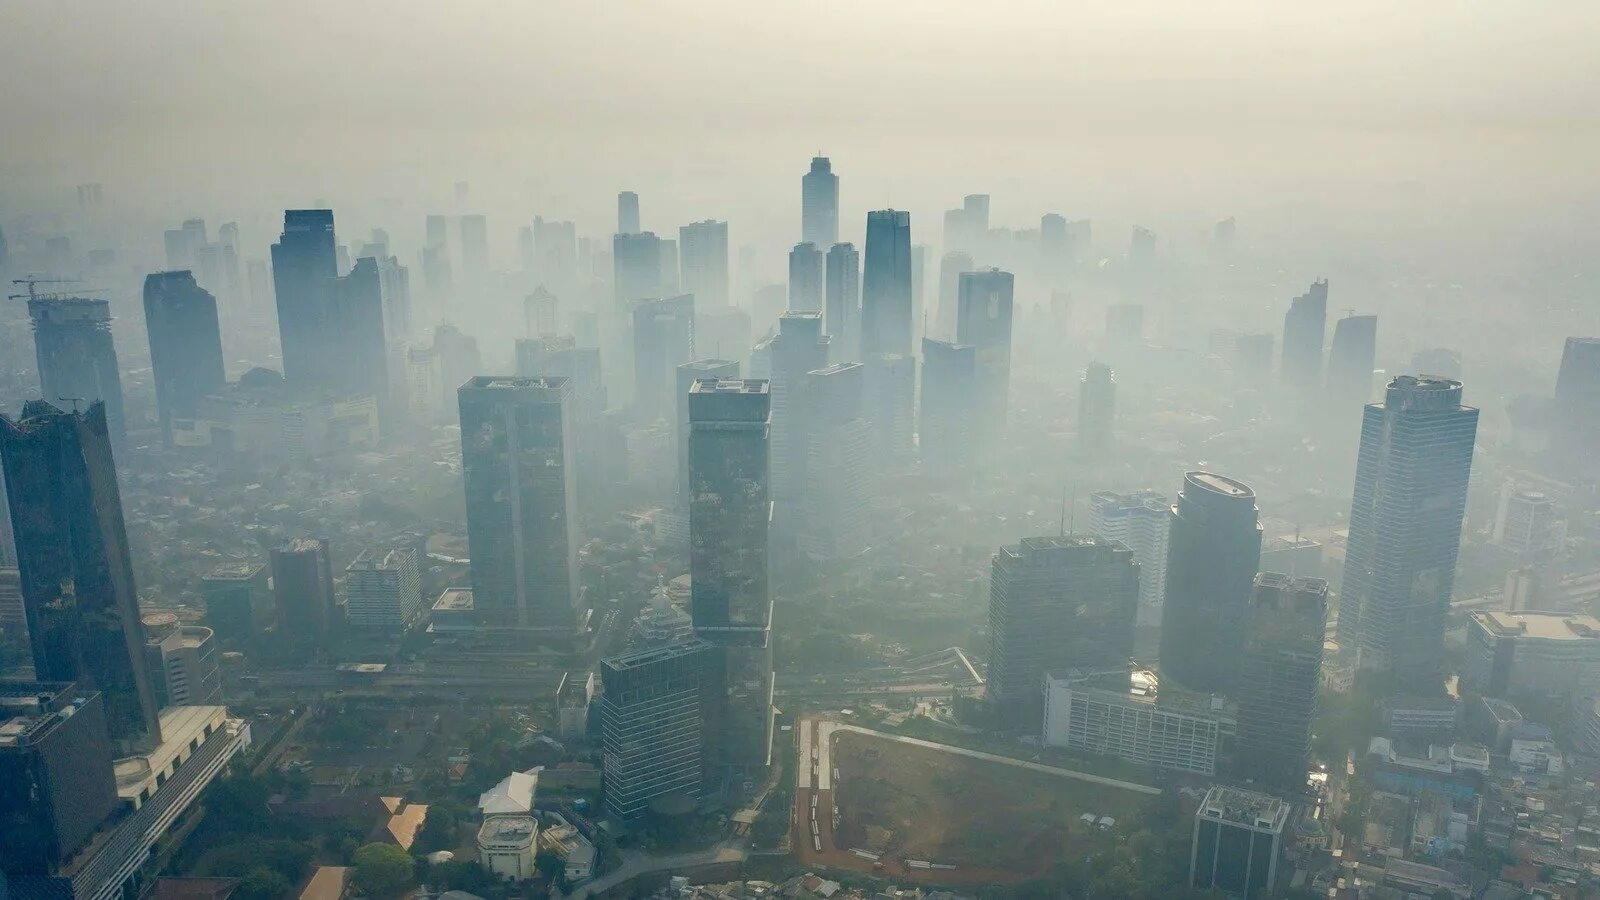 This pollution is gathered in clouds. Air pollution in the Cities. Air pollution in big Cities. Polluted Air. The most polluted City.